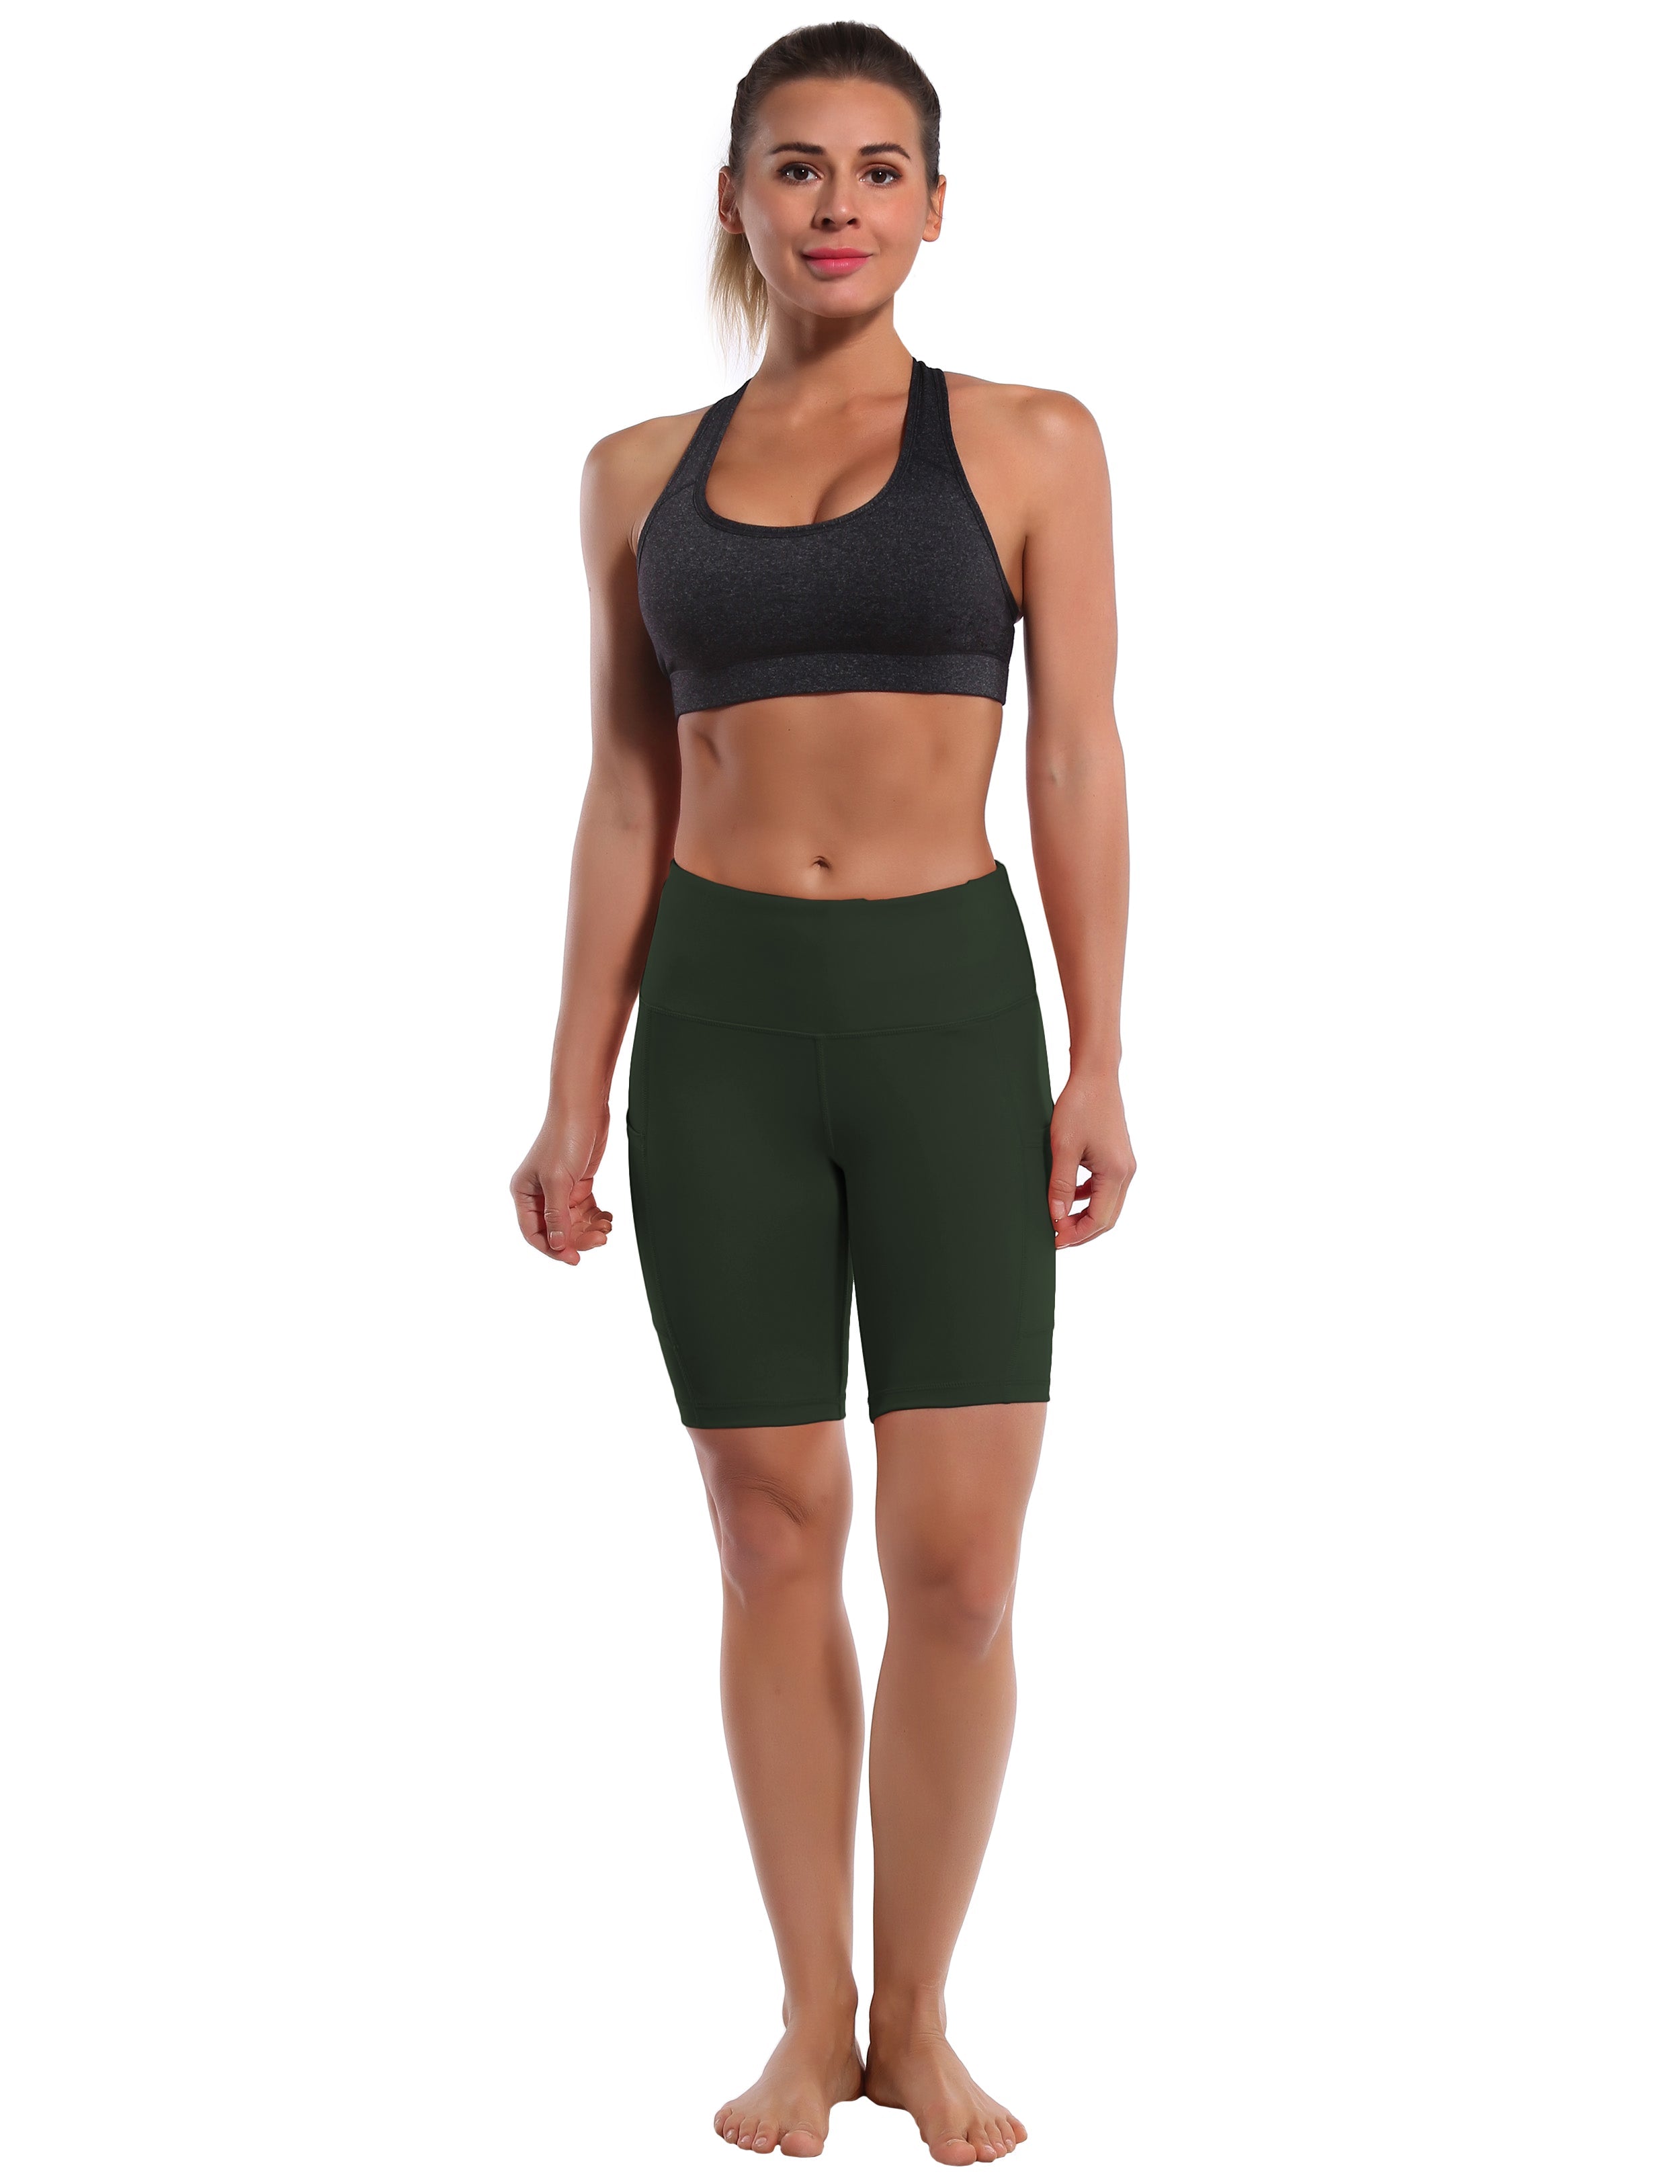 8" Side Pockets Pilates Shorts olivegray Sleek, soft, smooth and totally comfortable: our newest style is here. Softest-ever fabric High elasticity High density 4-way stretch Fabric doesn't attract lint easily No see-through Moisture-wicking Machine wash 75% Nylon, 25% Spandex